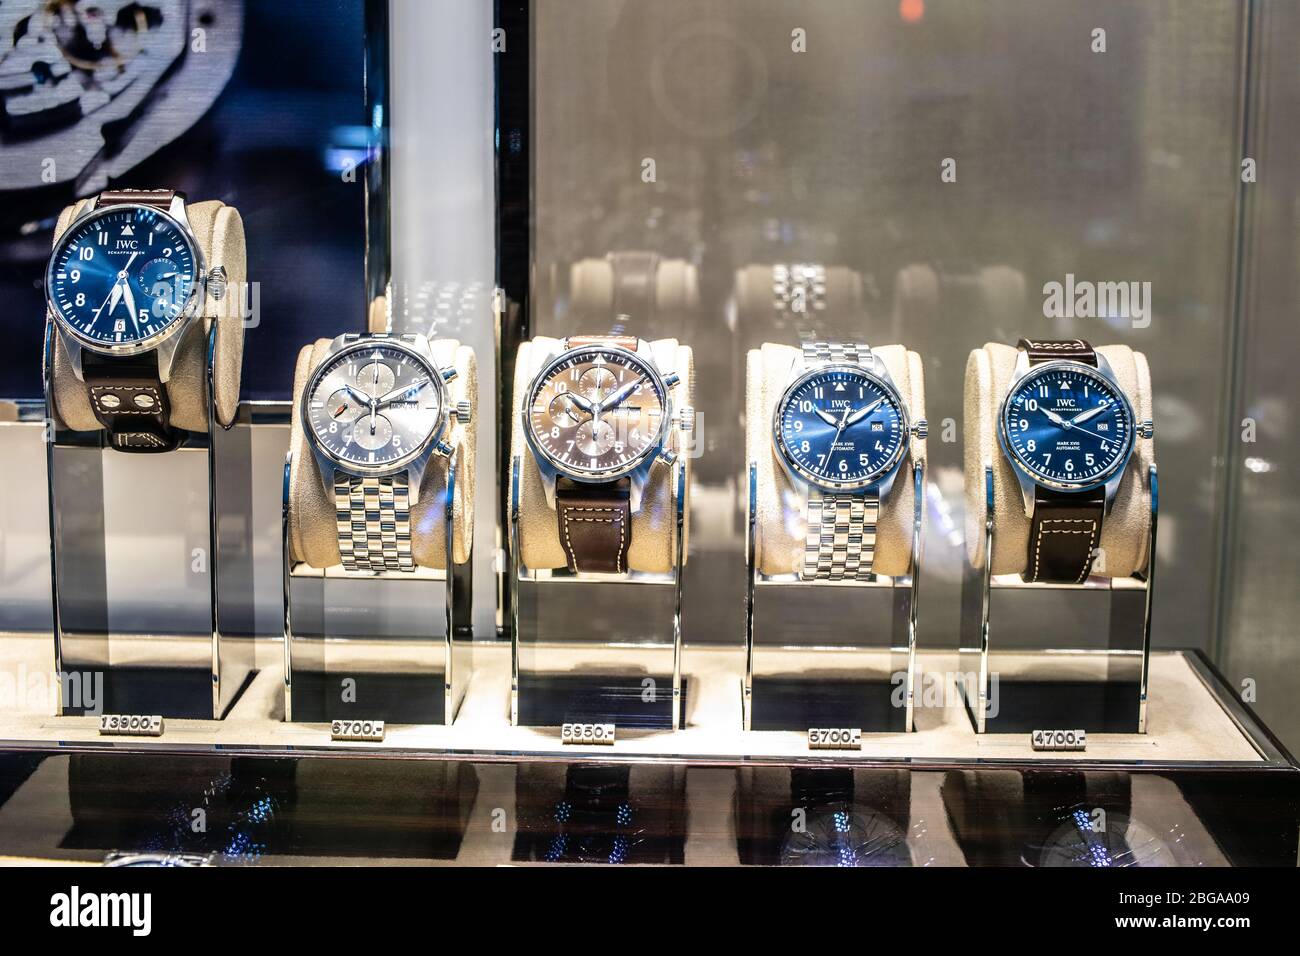 Page 3 - Expensive Watches High Resolution Stock Photography and Images -  Alamy